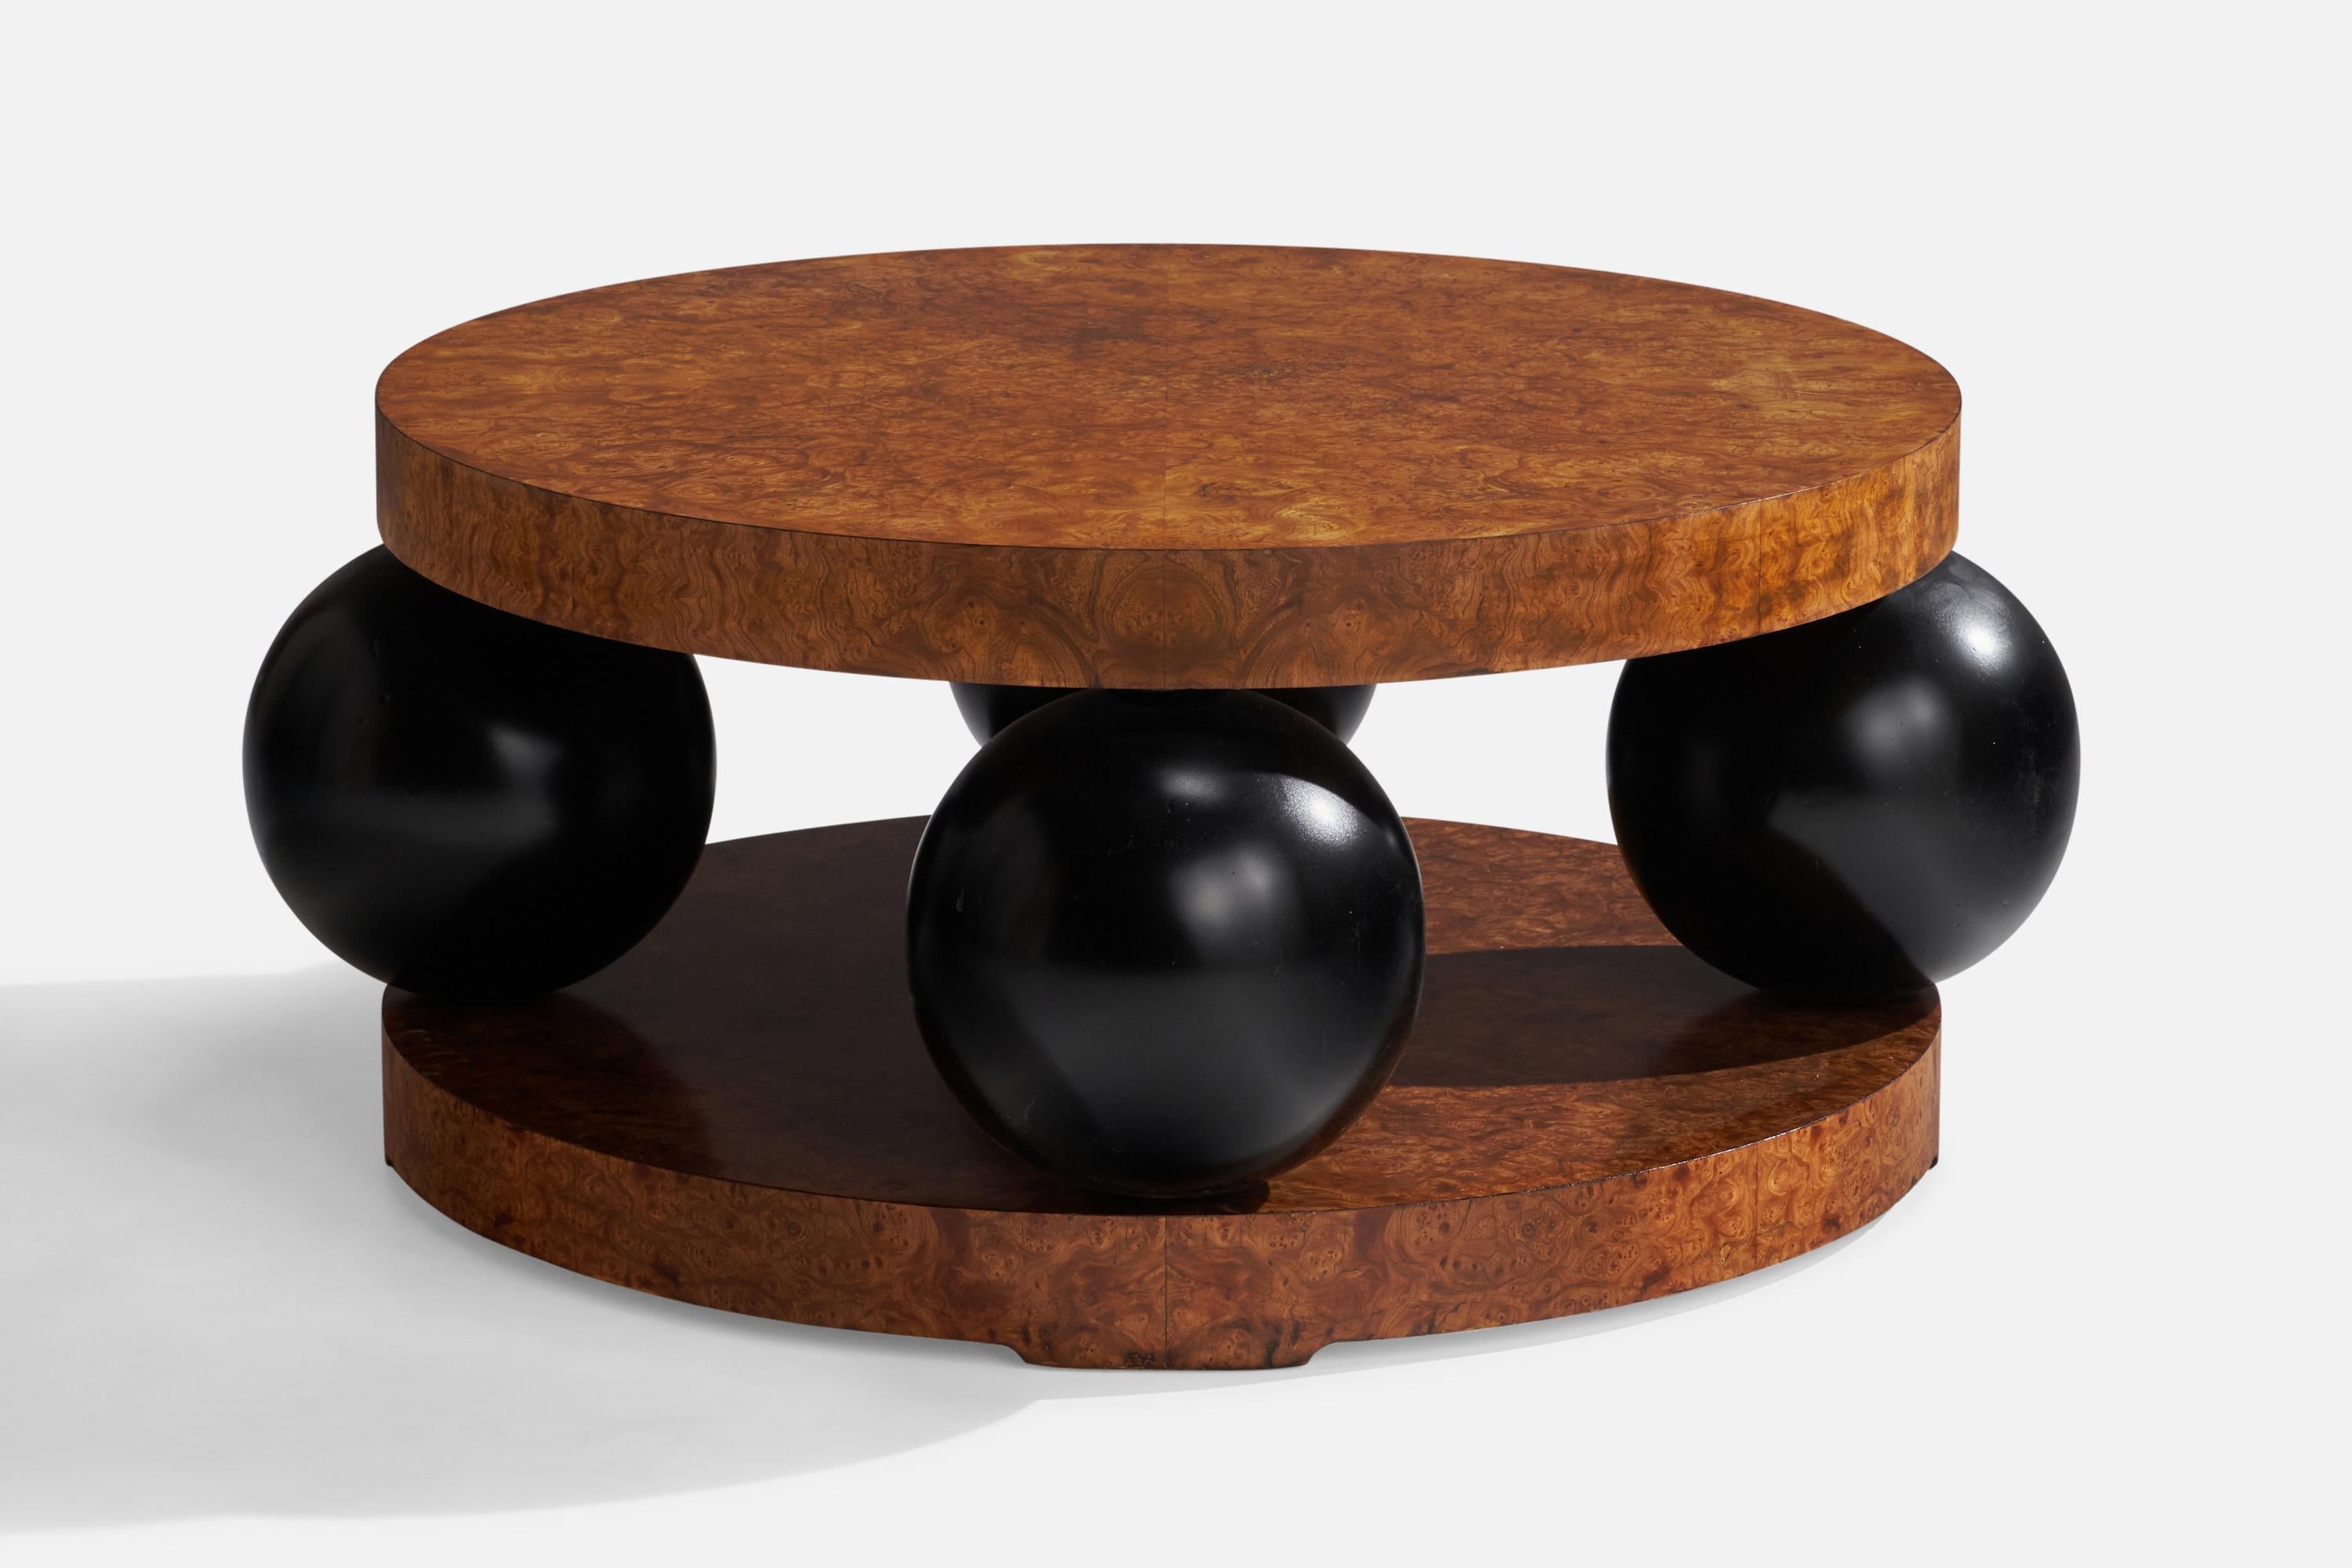 A sizeable black-lacquered wood and burl wood coffee table designed by Erik 